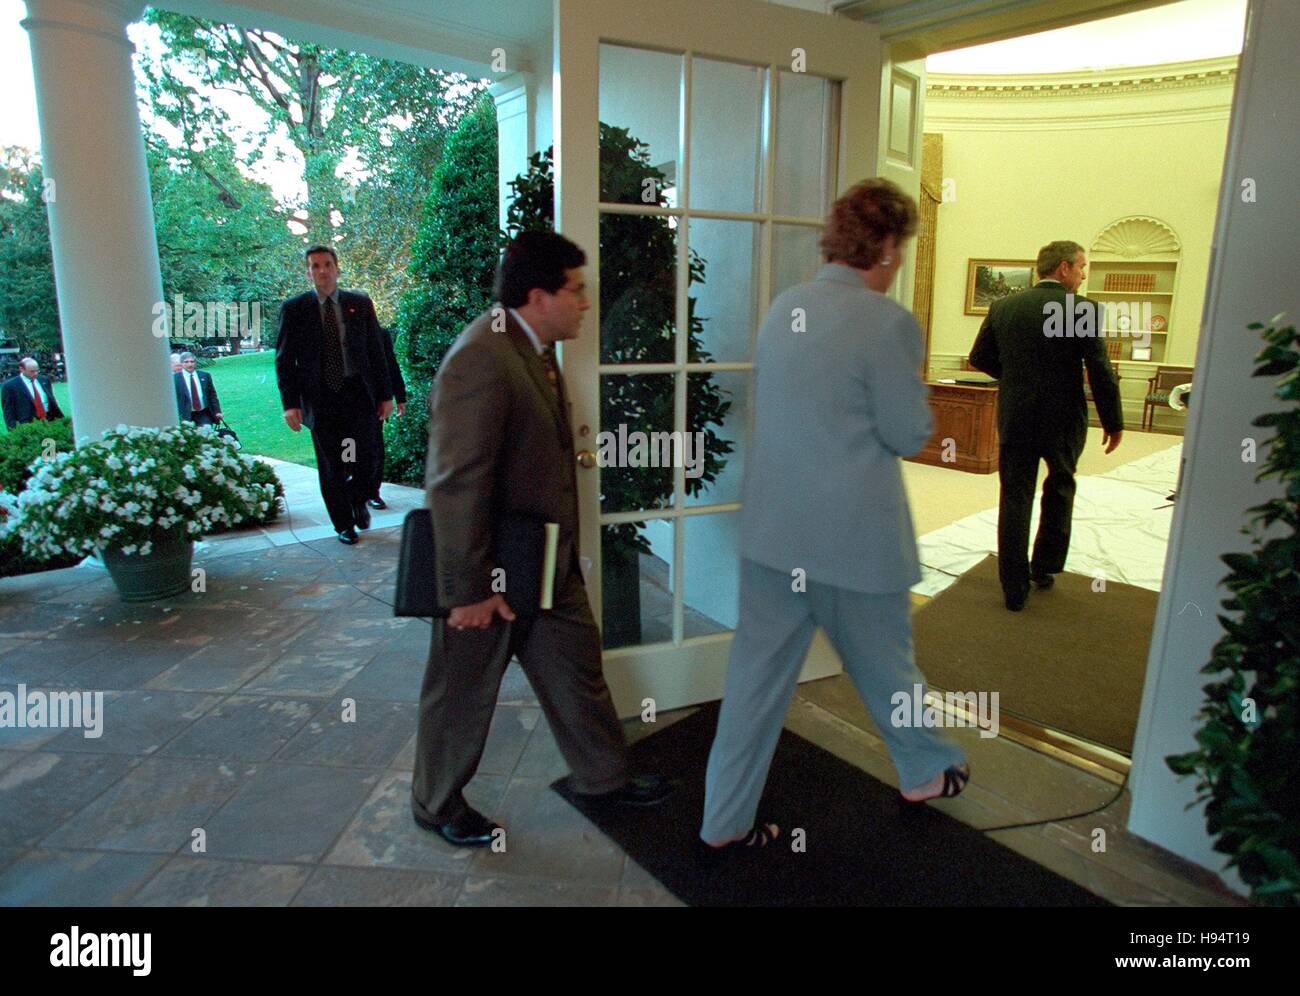 Presidential Counselors Karen Hughes and Alberto Gonzales follow U.S. President George W. Bush into the White House Oval Office upon his return September 11, 2001 in Washington, DC. Stock Photo